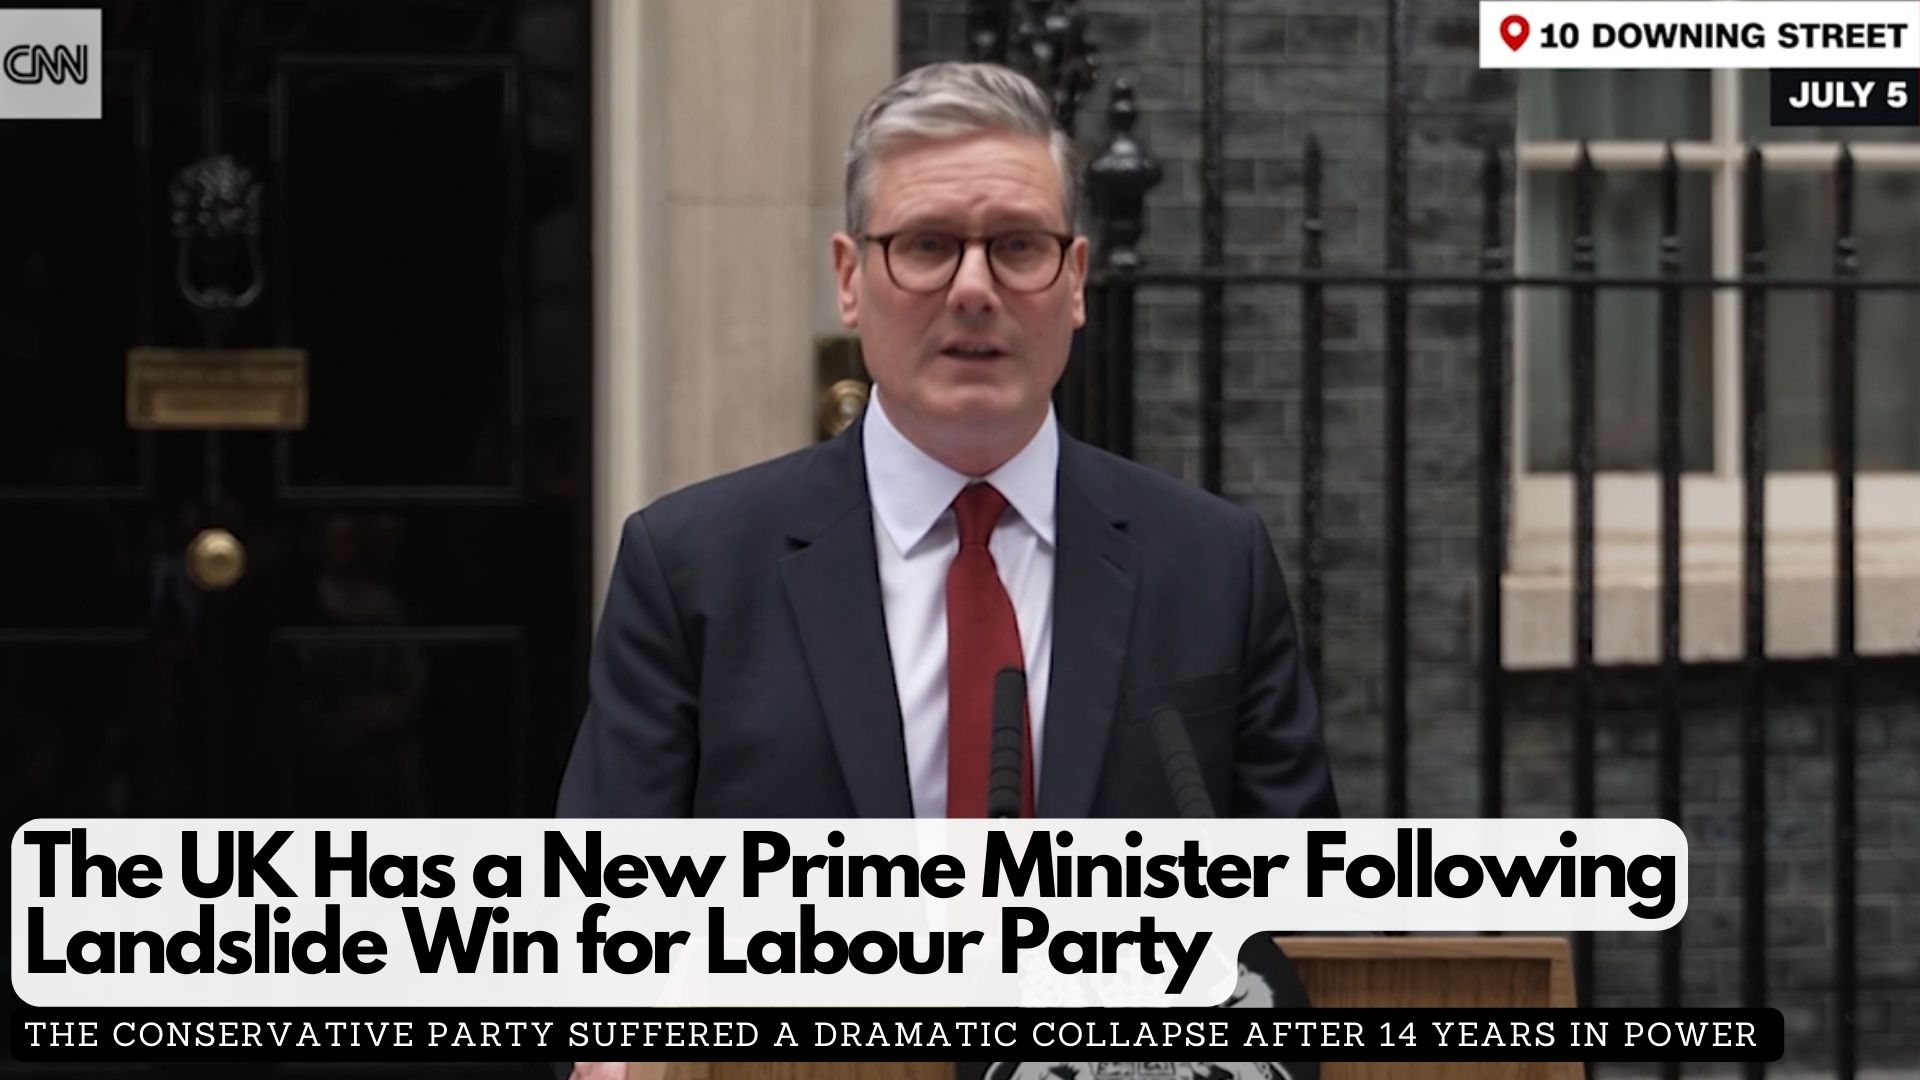 The UK Has a New Prime Minister Following Landslide Win for Labour Party 